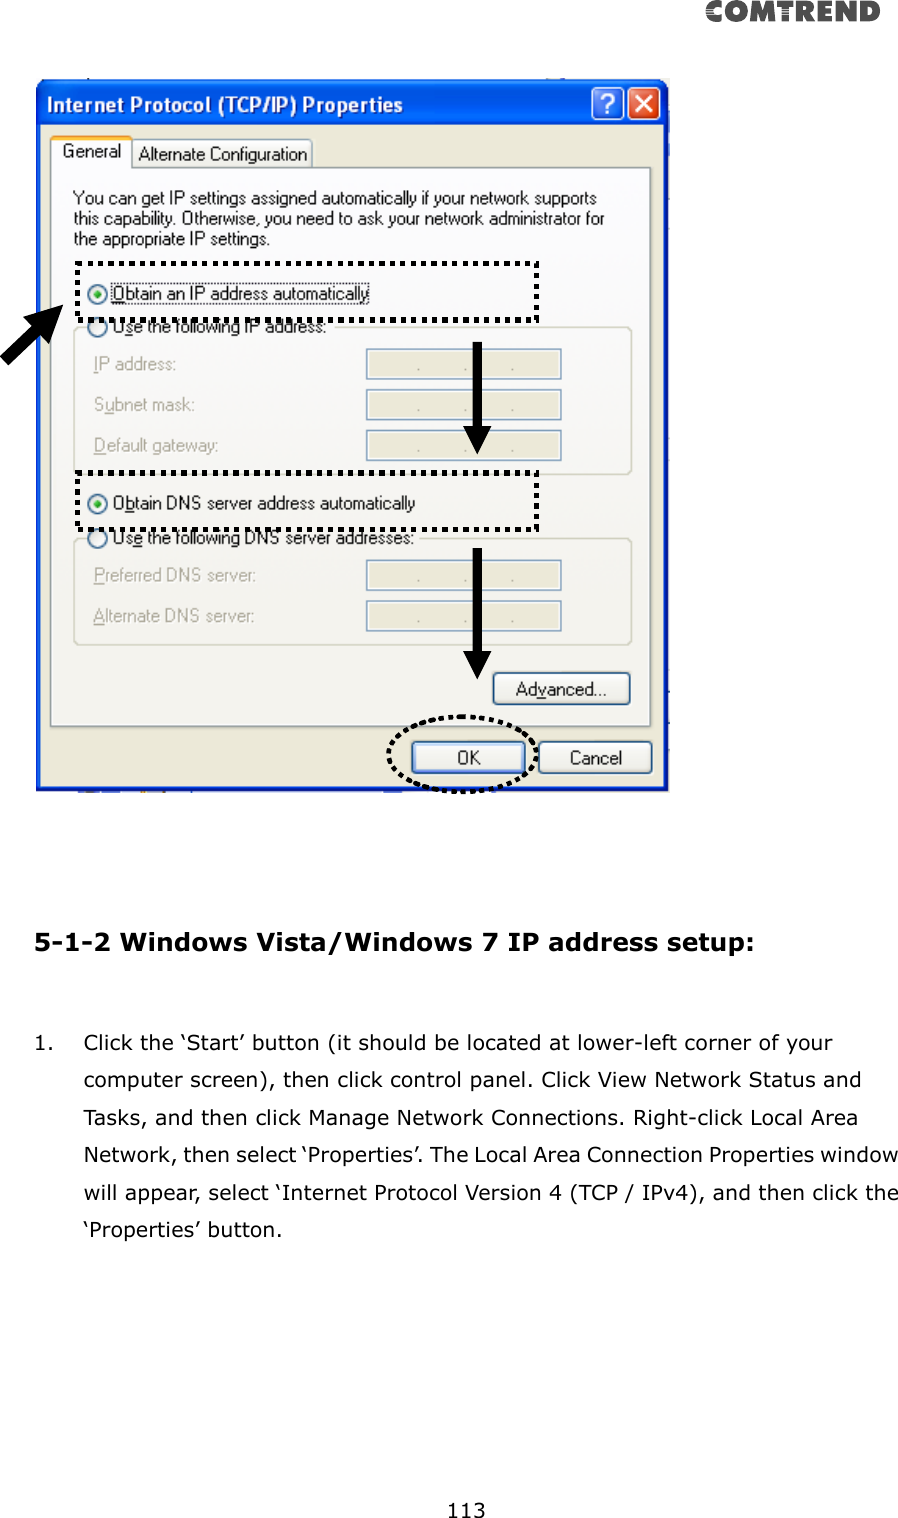       113      5-1-2 Windows Vista/Windows 7 IP address setup:  1. Click the ‘Start’ button (it should be located at lower-left corner of your computer screen), then click control panel. Click View Network Status and Tasks, and then click Manage Network Connections. Right-click Local Area Network, then select ‘Properties’. The Local Area Connection Properties window will appear, select ‘Internet Protocol Version 4 (TCP / IPv4), and then click the ‘Properties’ button.  